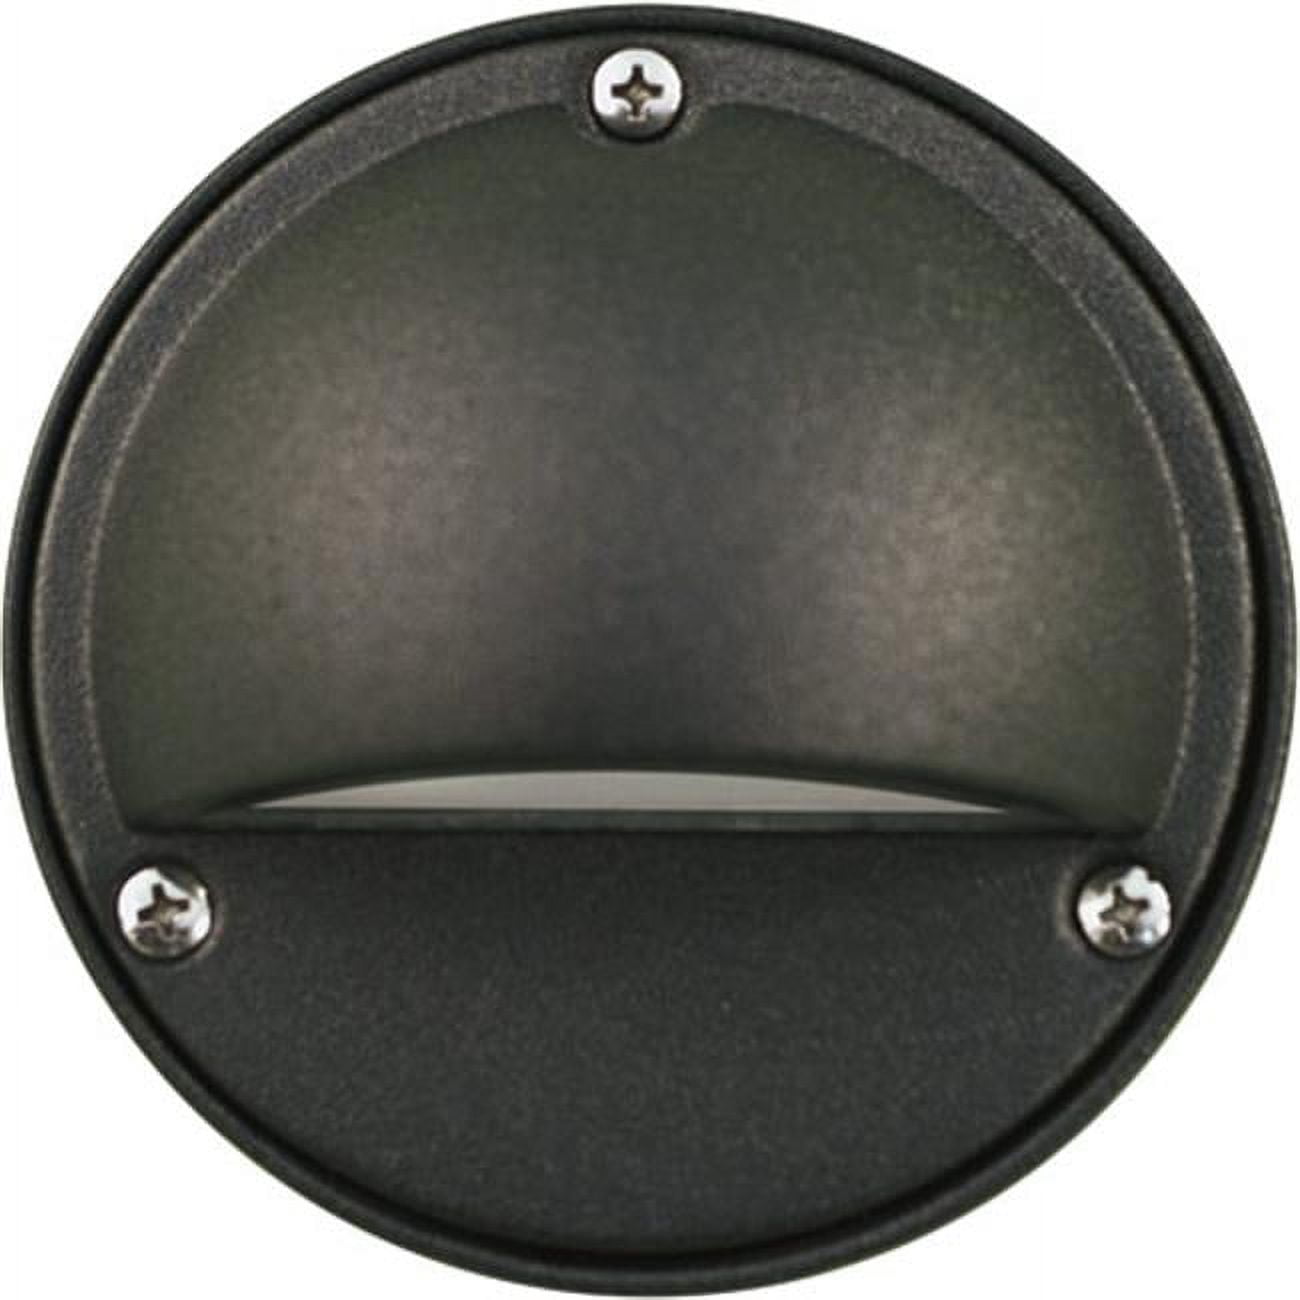 Picture of Dabmar Lighting LV605-B Cast Aluminum Surface Mount Hooded Brick, Step, Wall & Deck Light, Black - 4.30 x 4.30 x 2.30 in.